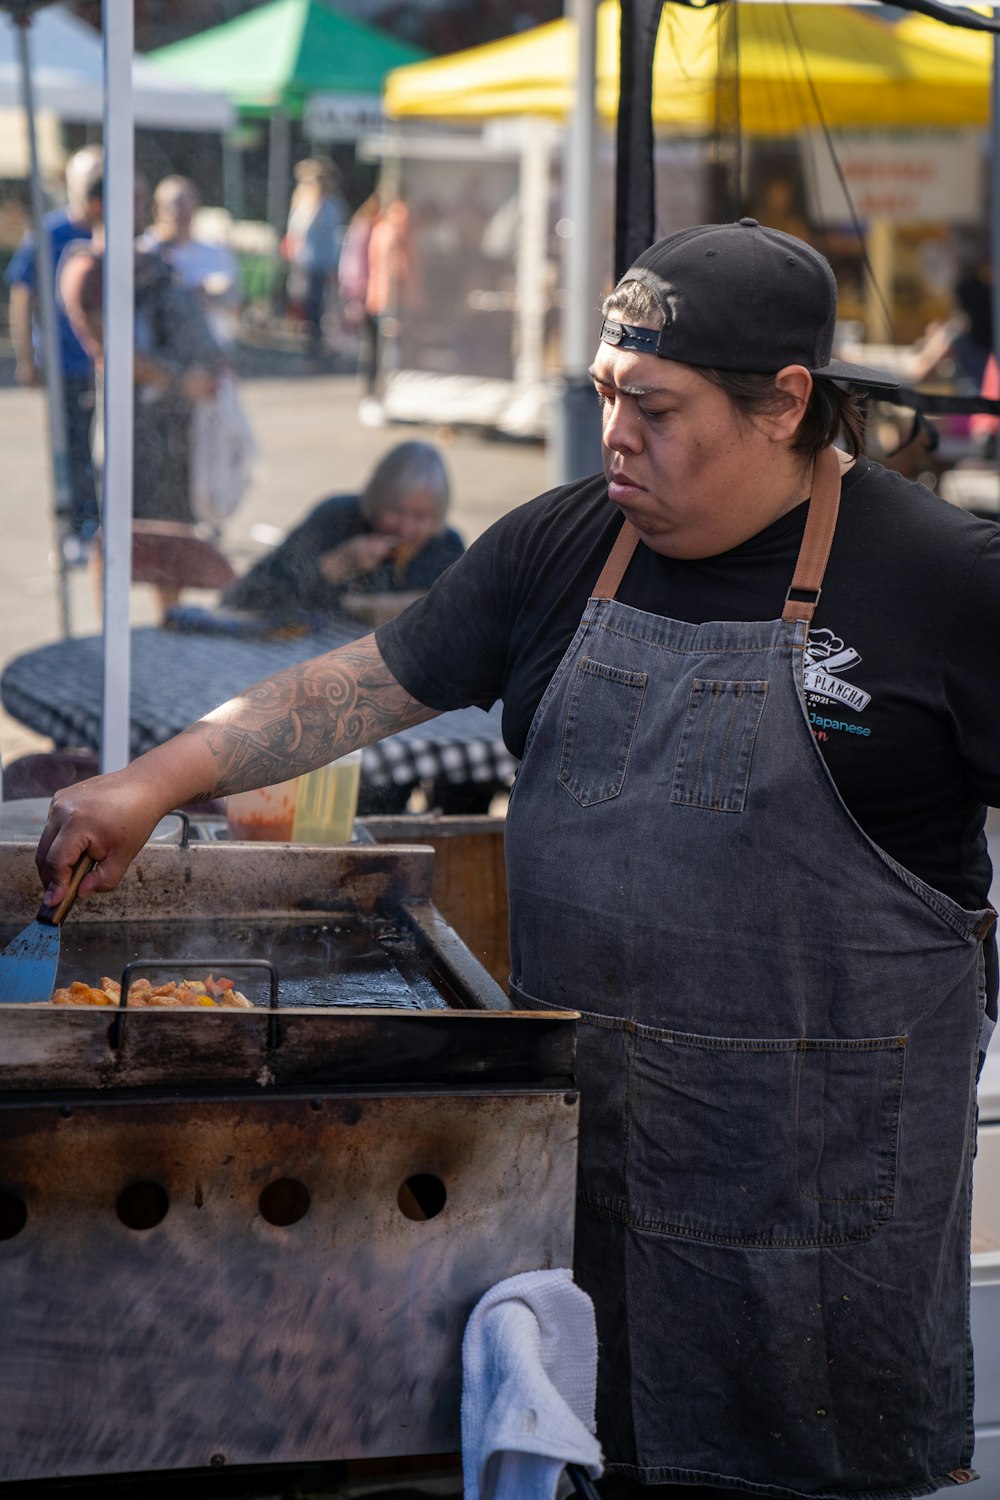 a person cooking food on a grill outside